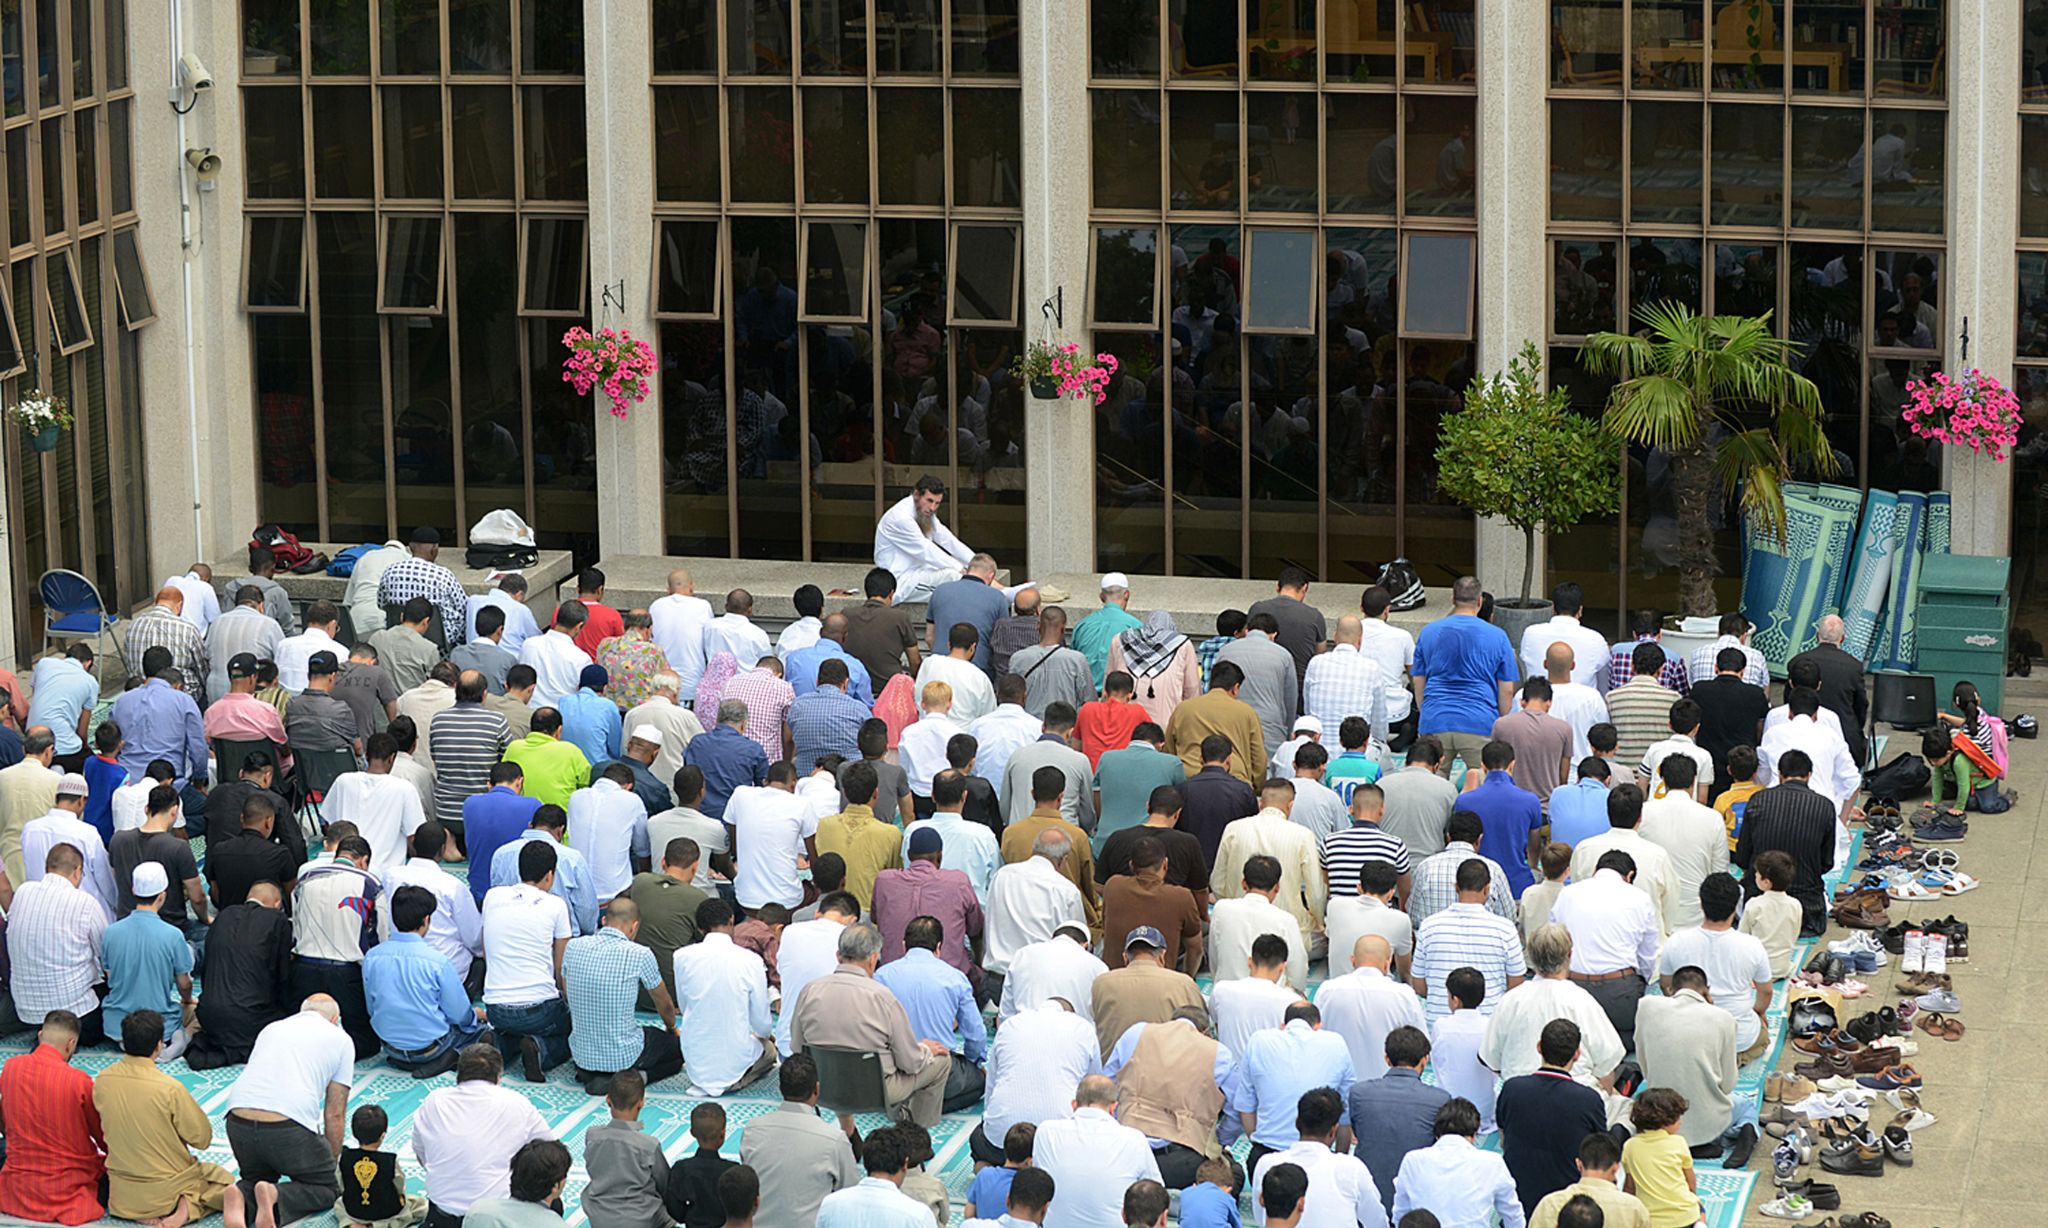 Pre-pandemic mosques were full during Ramadan and seen here for congregational Eid prayers (AFP)